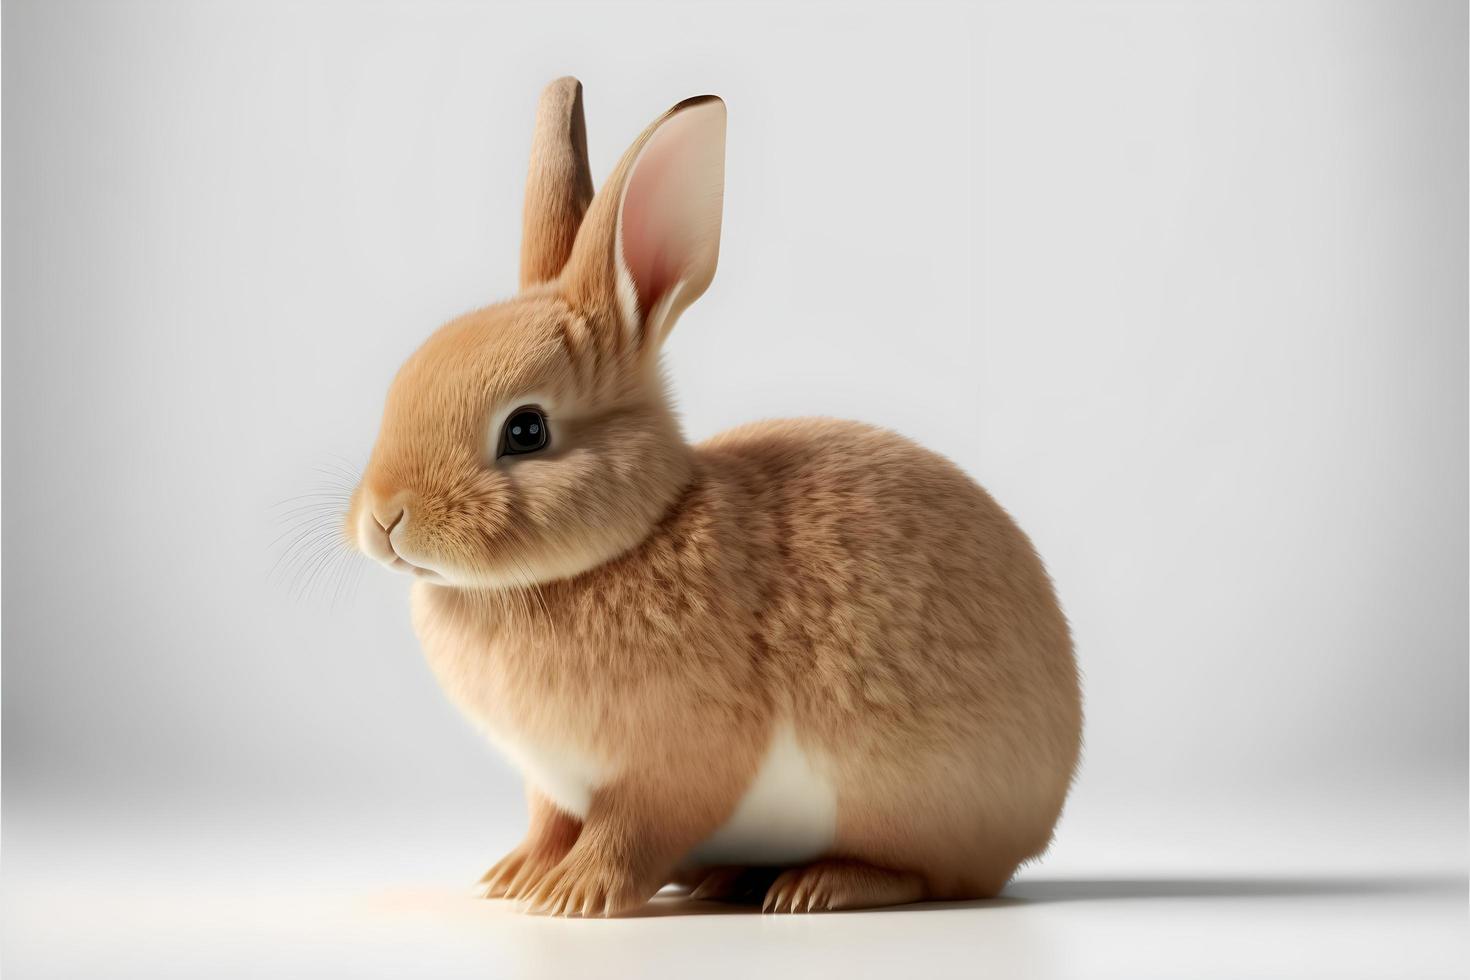 Cute white and brown rabbit sitting infront of isolated plain white background, Free Photo